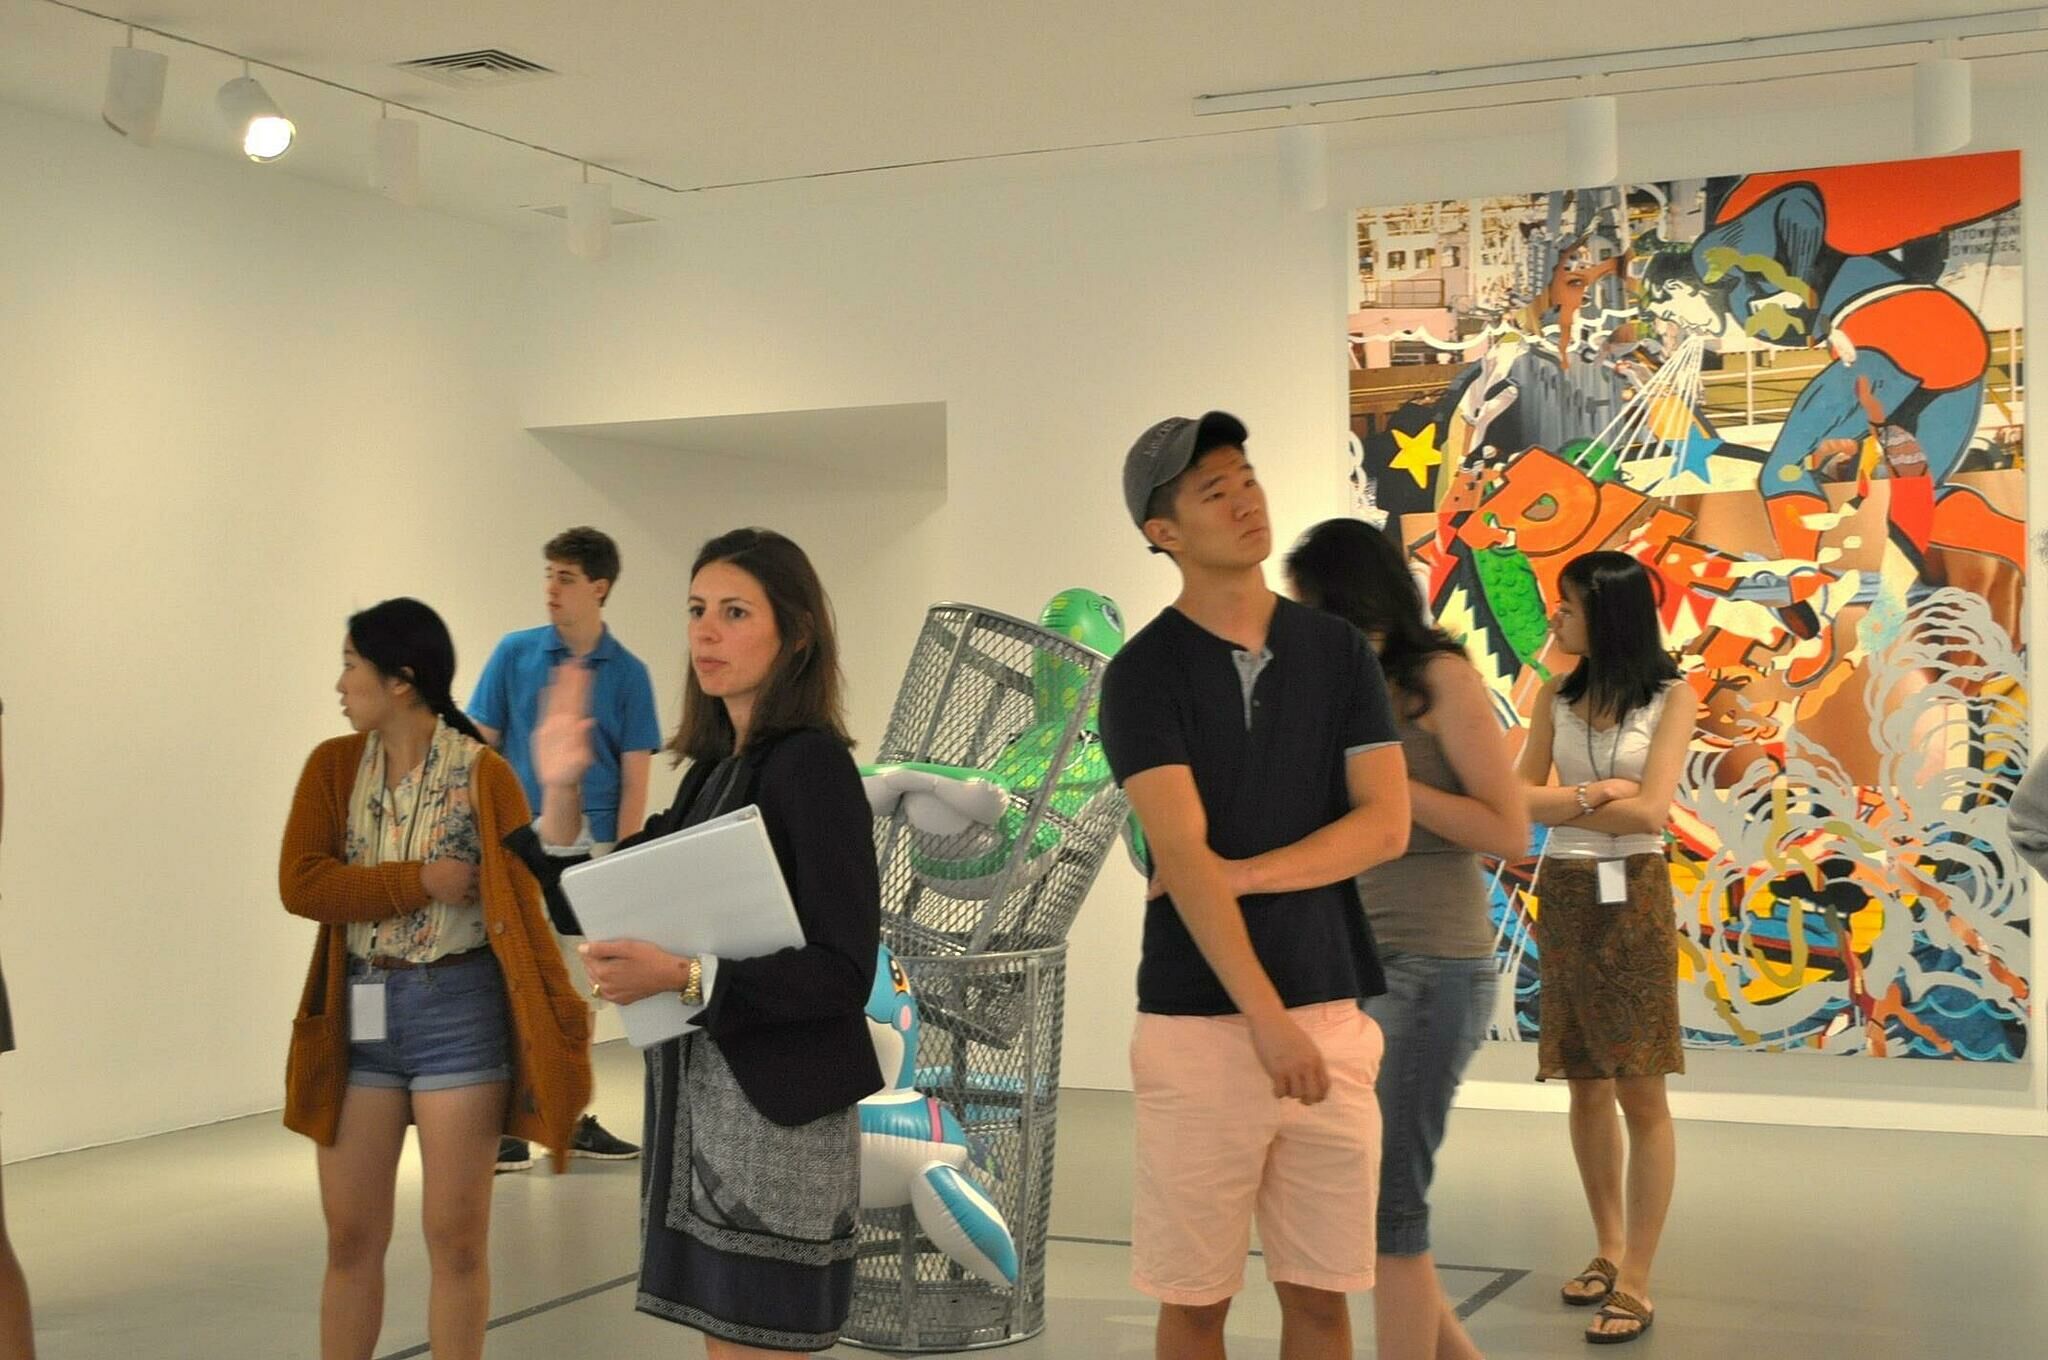 students stand in room with artwork